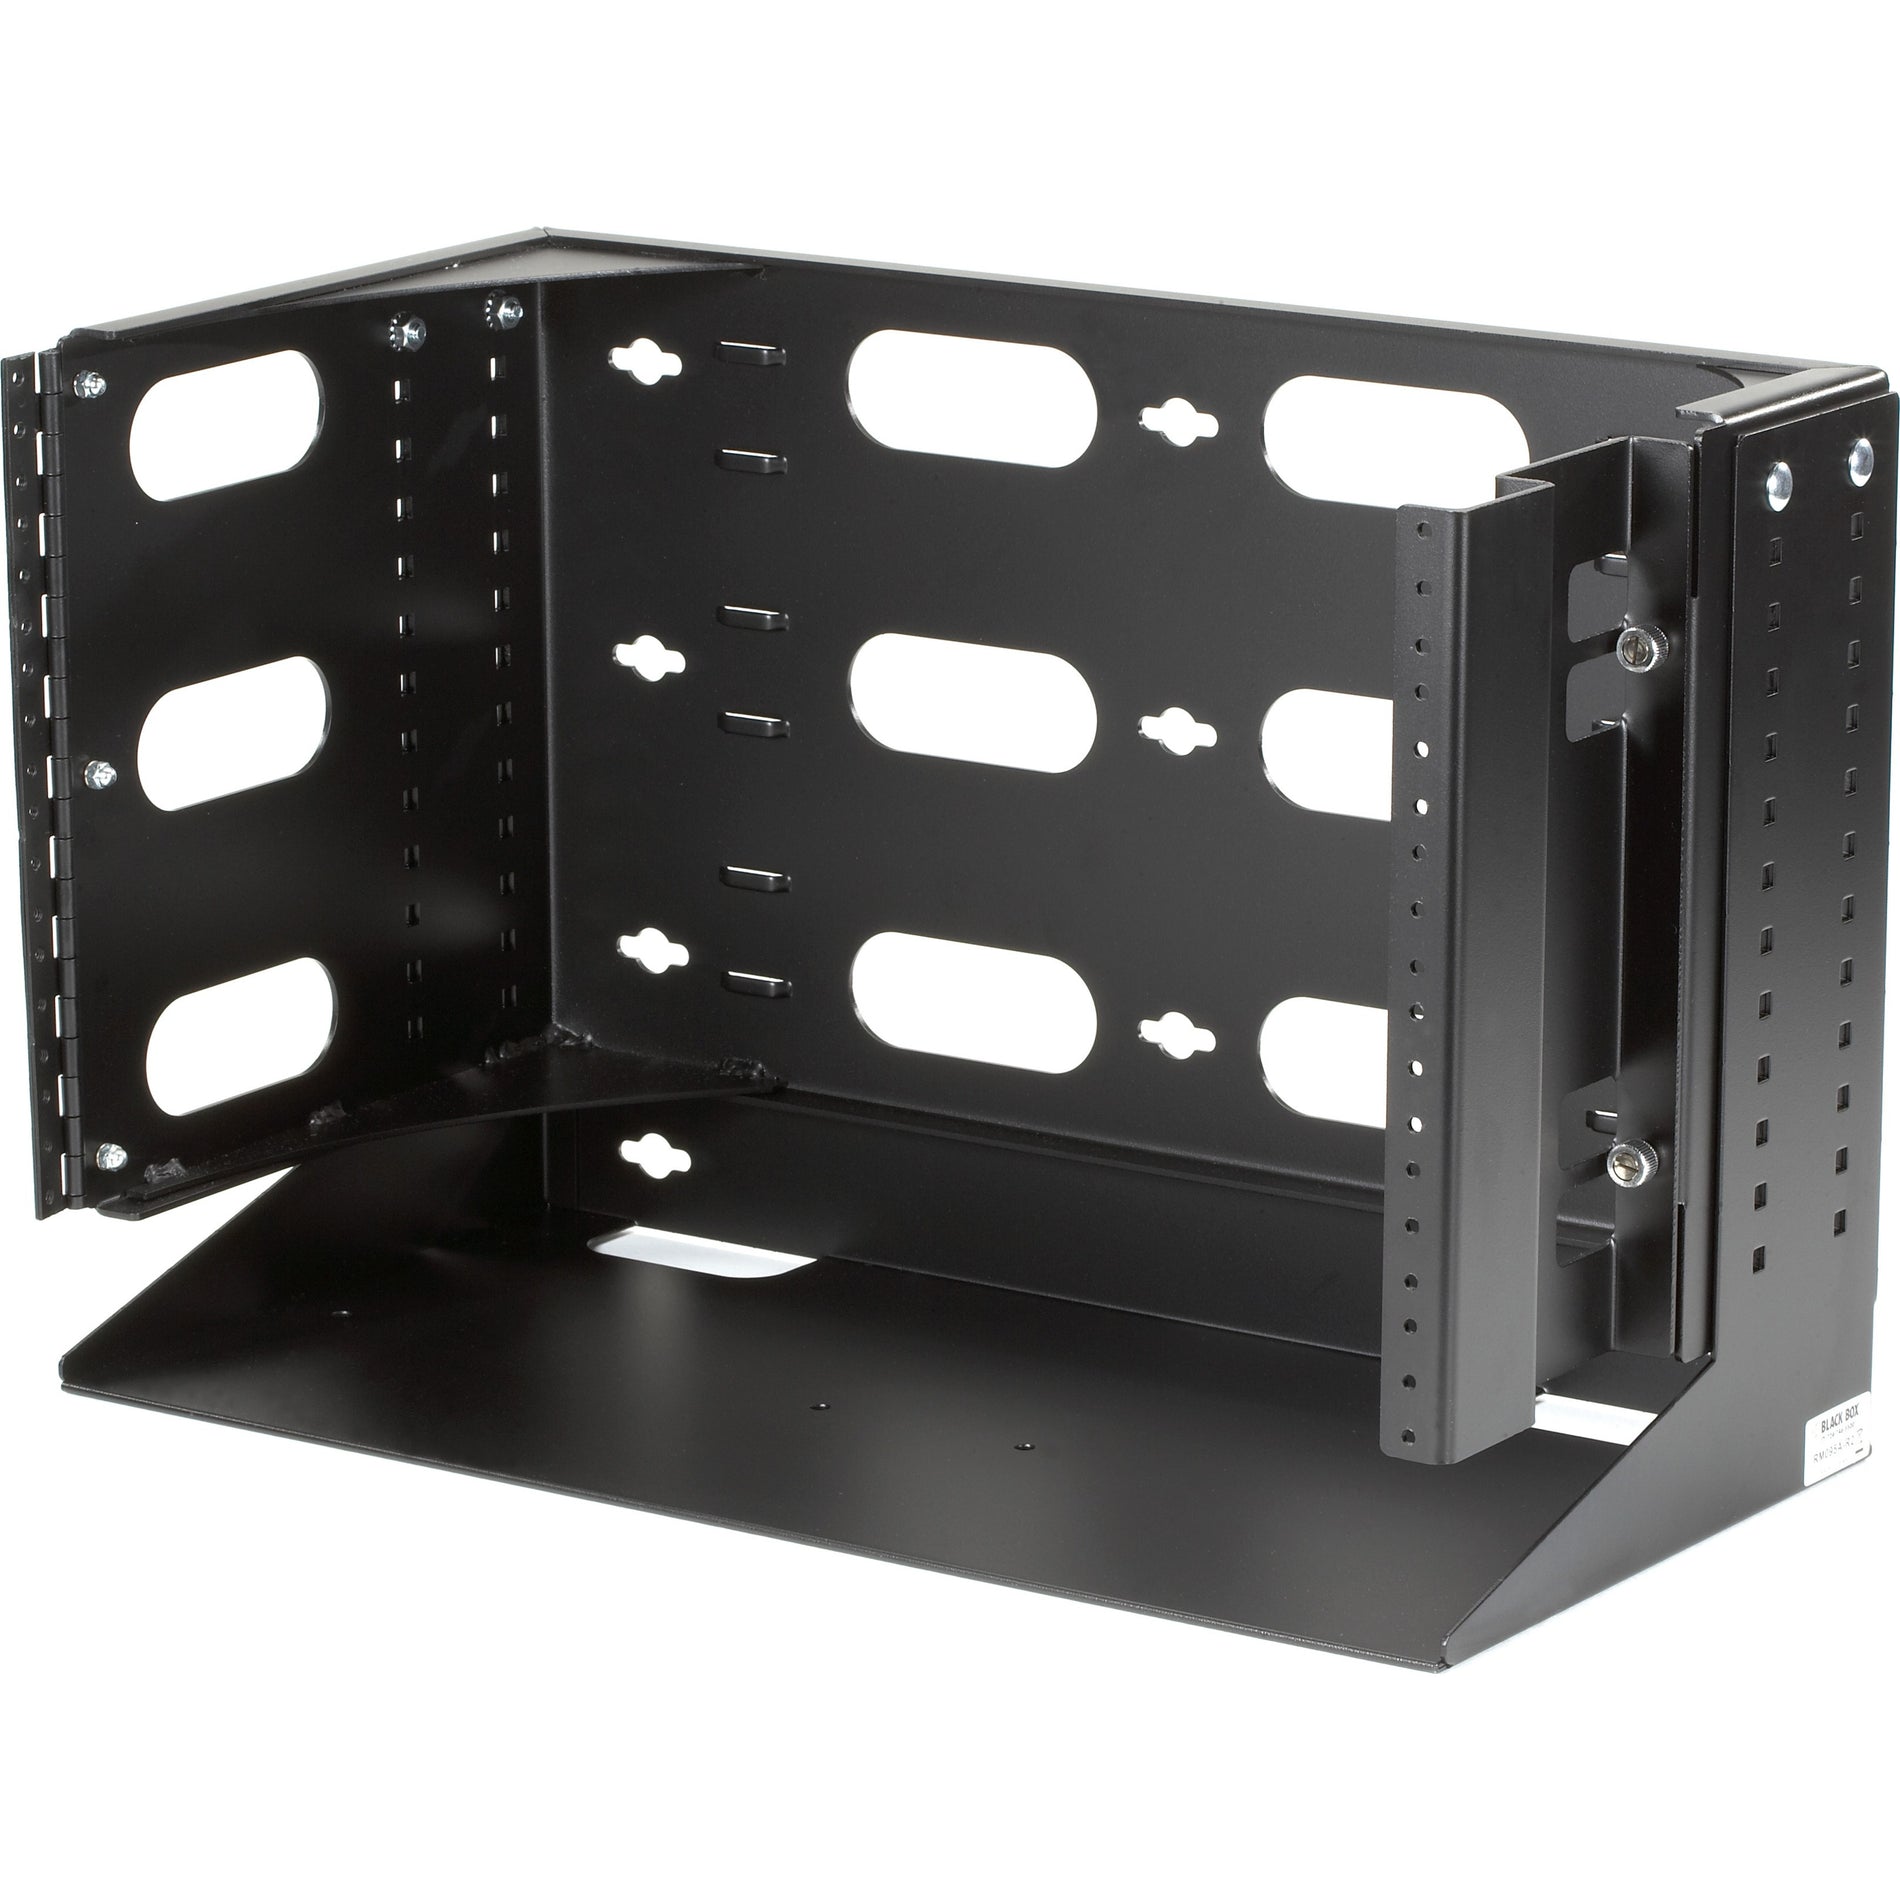 Black Box RM095A-R2 Wallmount Rack 12" with Swing Bracket and Adjustable Shelf, Lockable Door, Cable Management